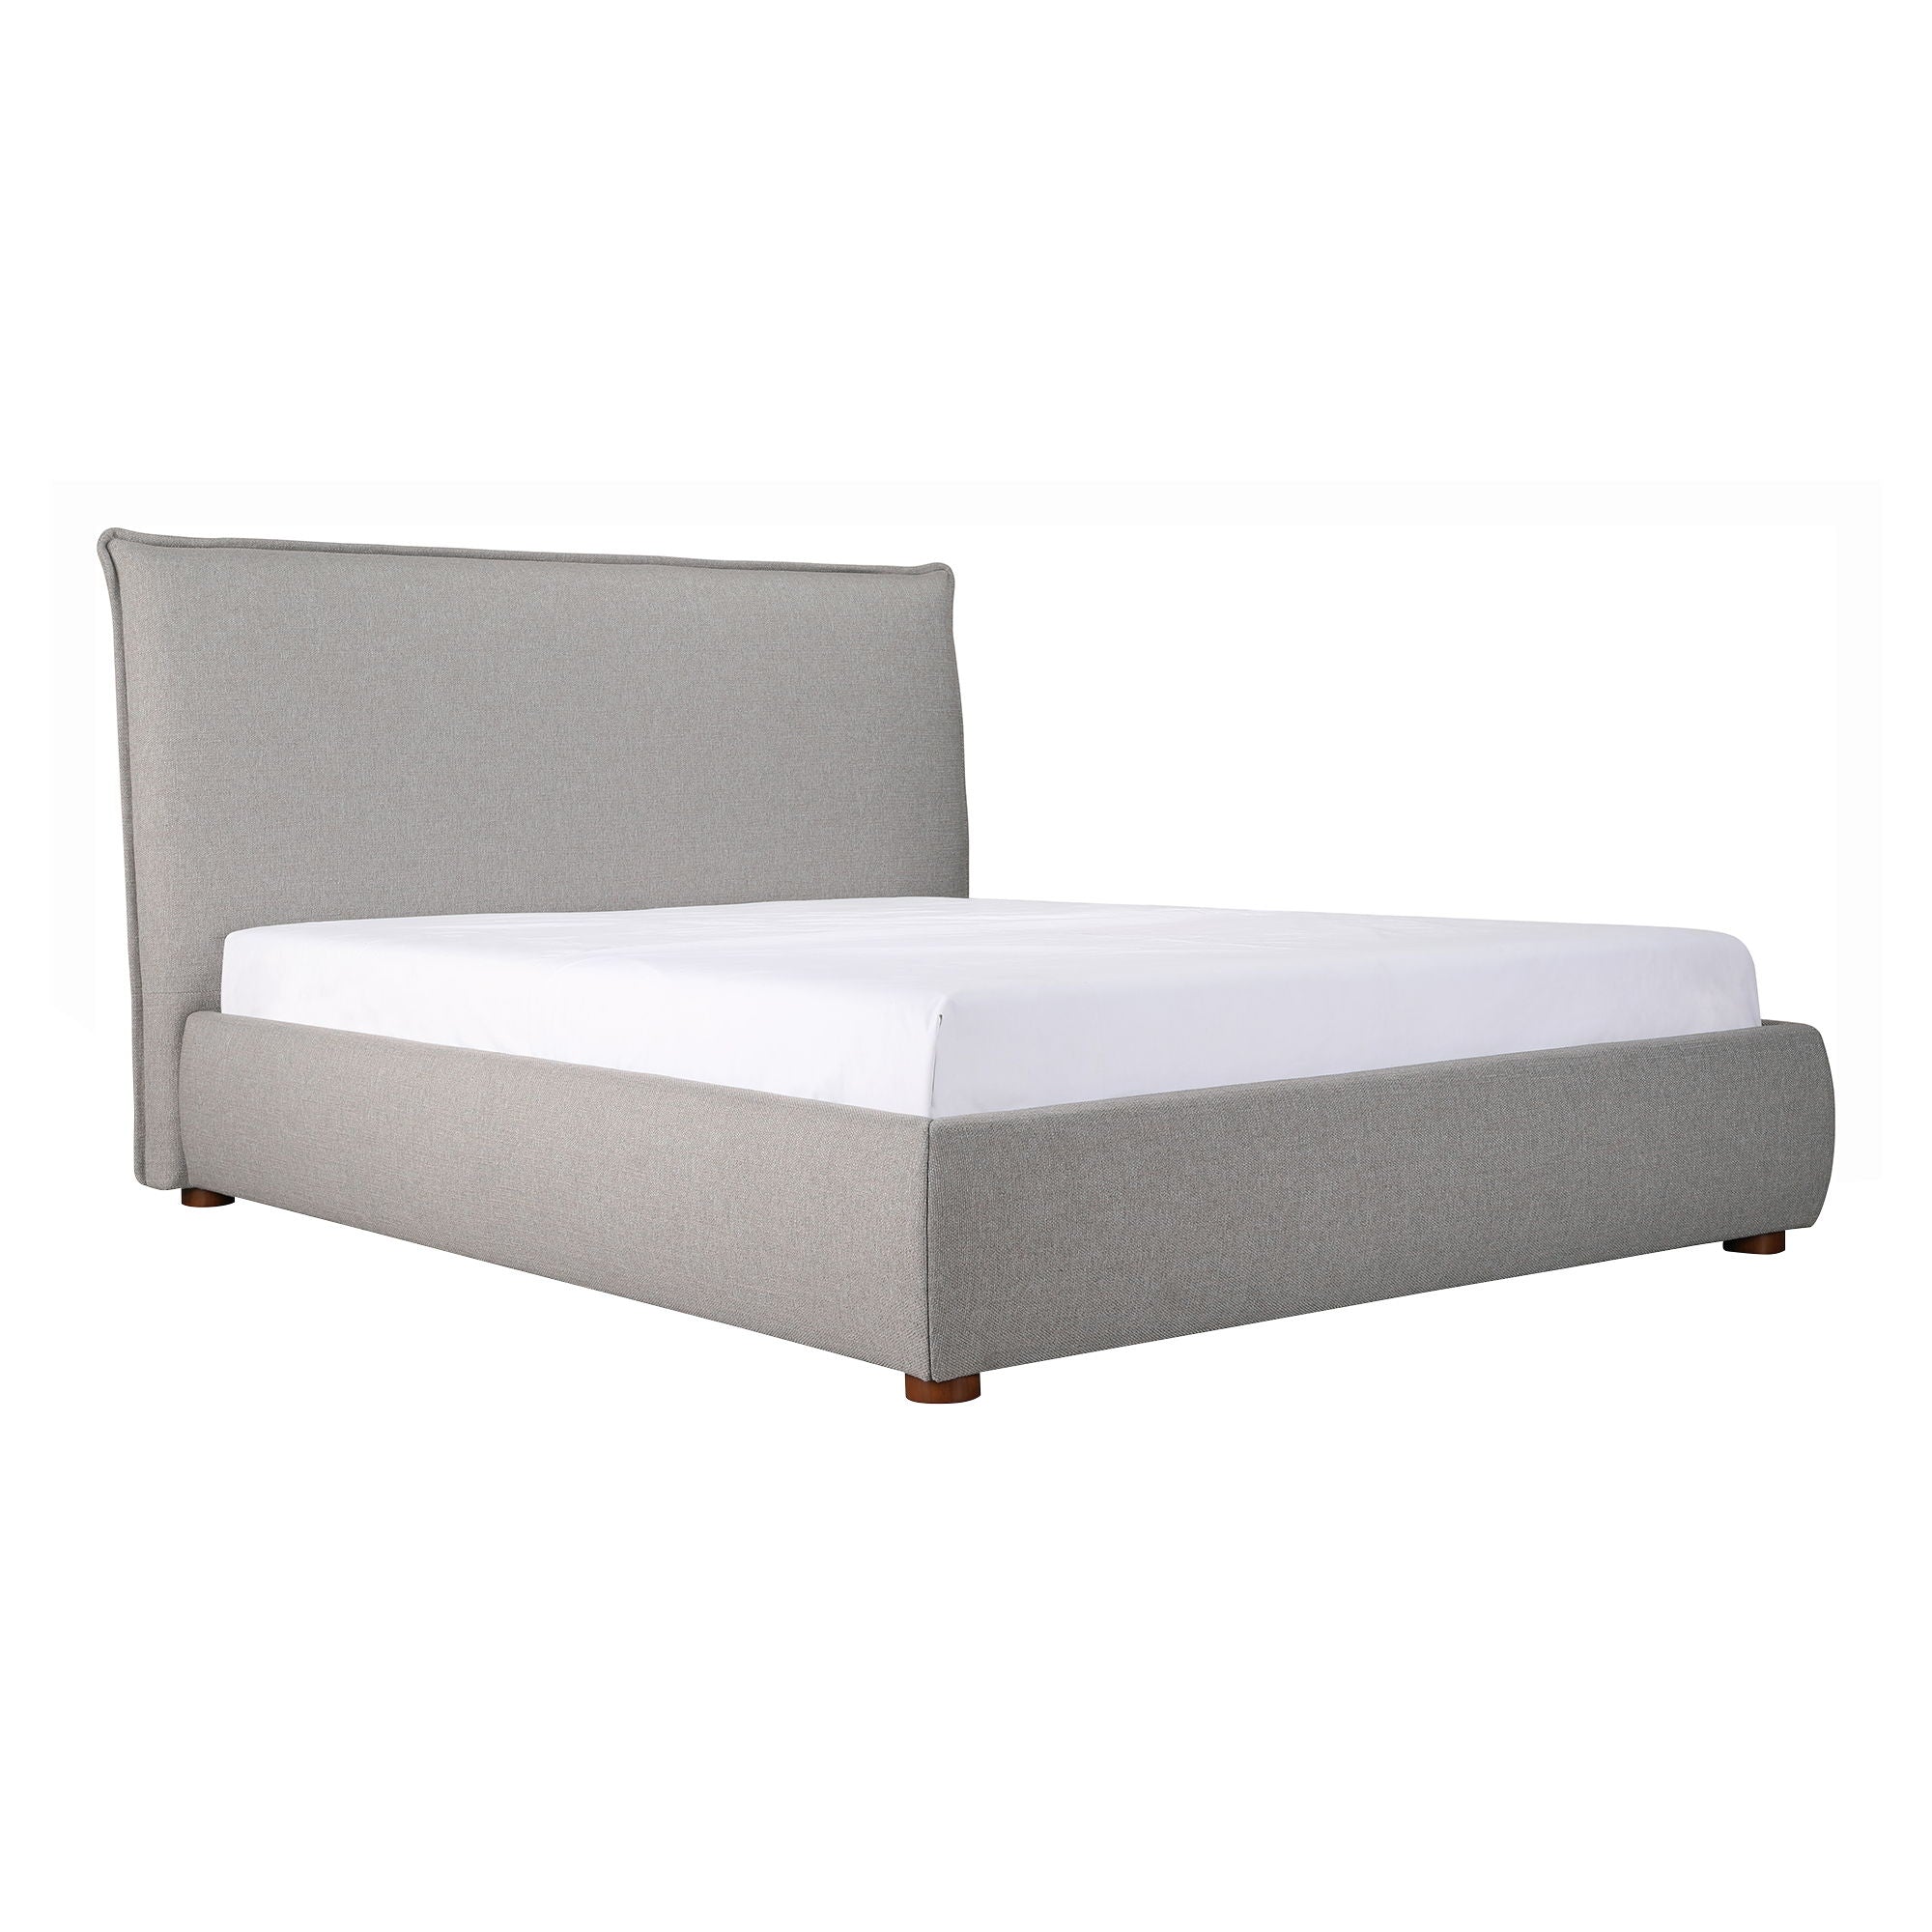 Luzon - King Bed - Greystone - Linen